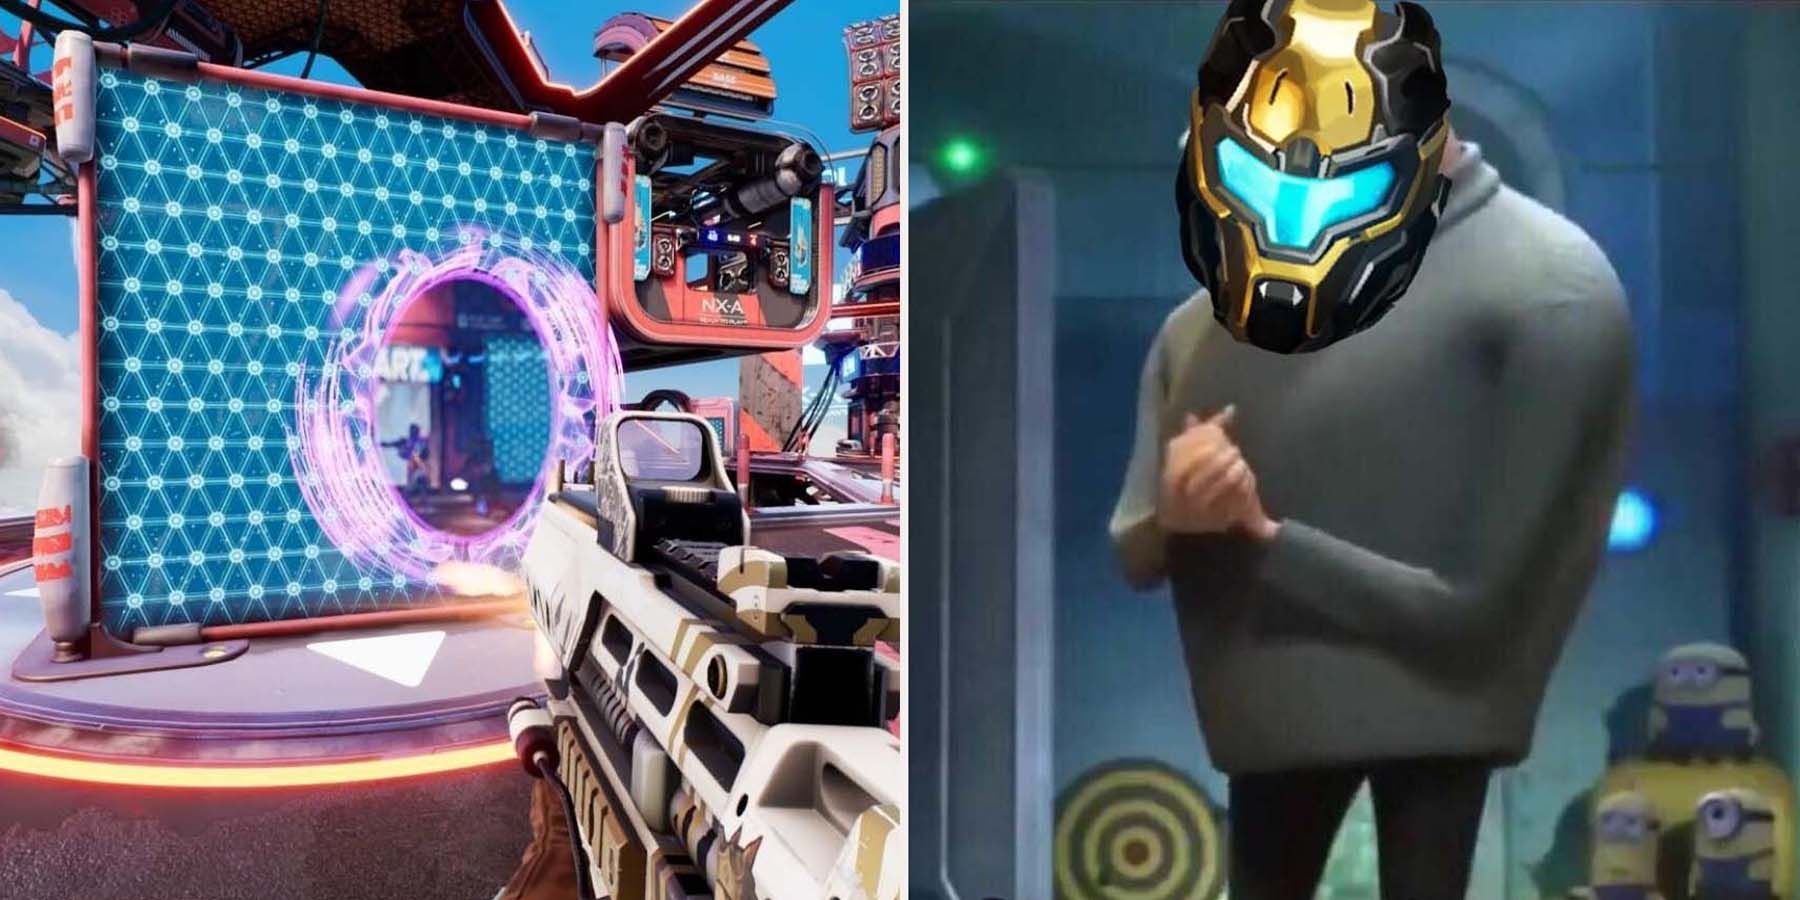 Splitgate 6 Best Memes Of The Game featured image meme and portal in game